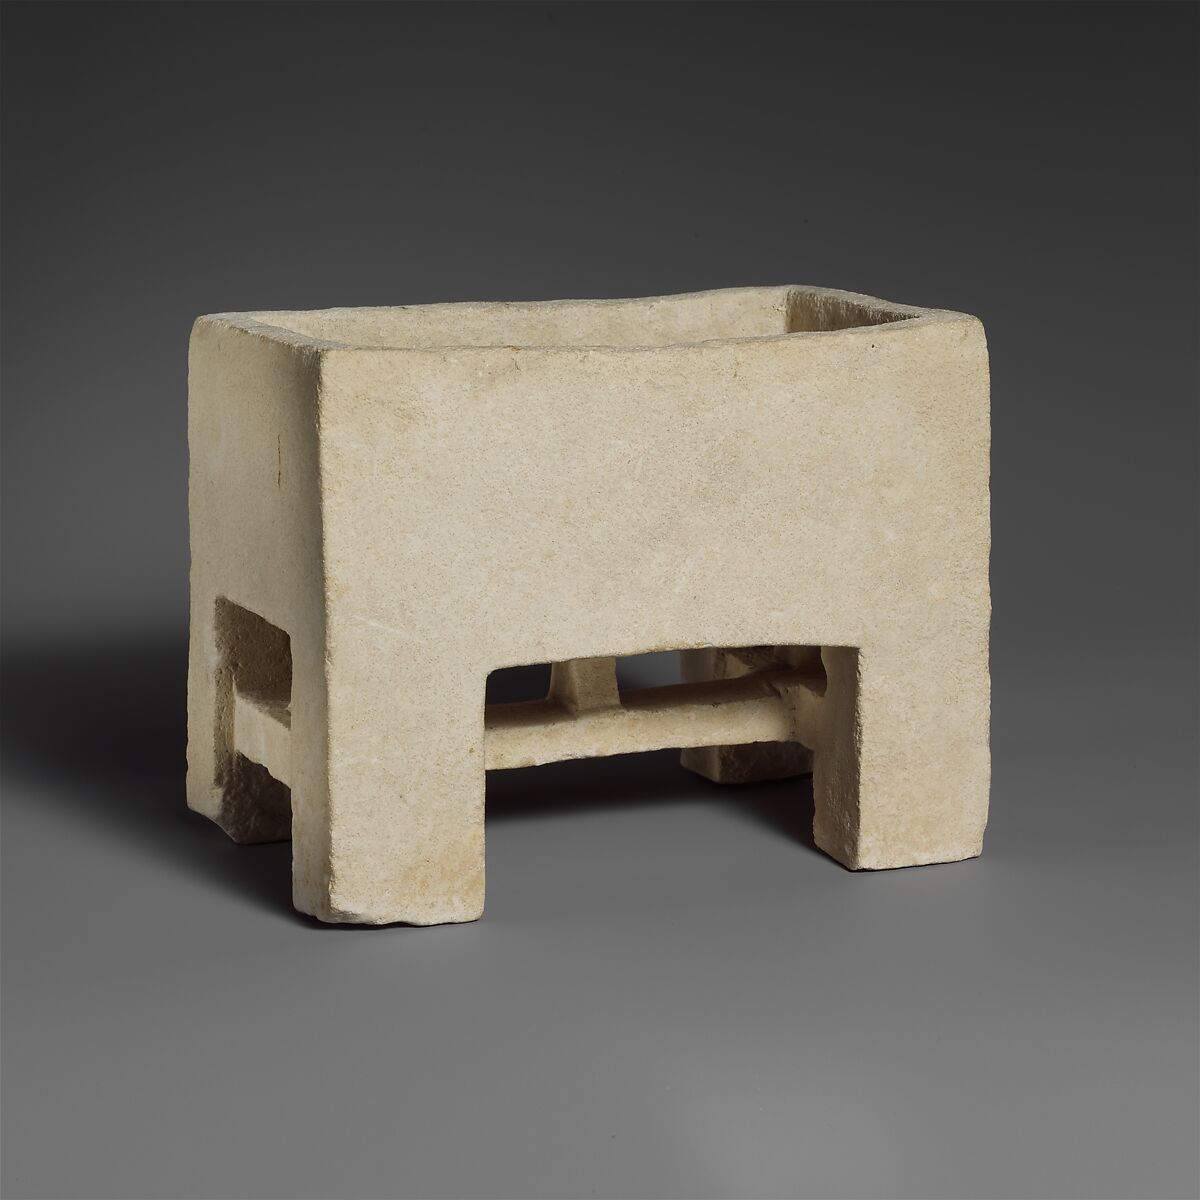 Undecorated limestone chest, Limestone, Cypriot 